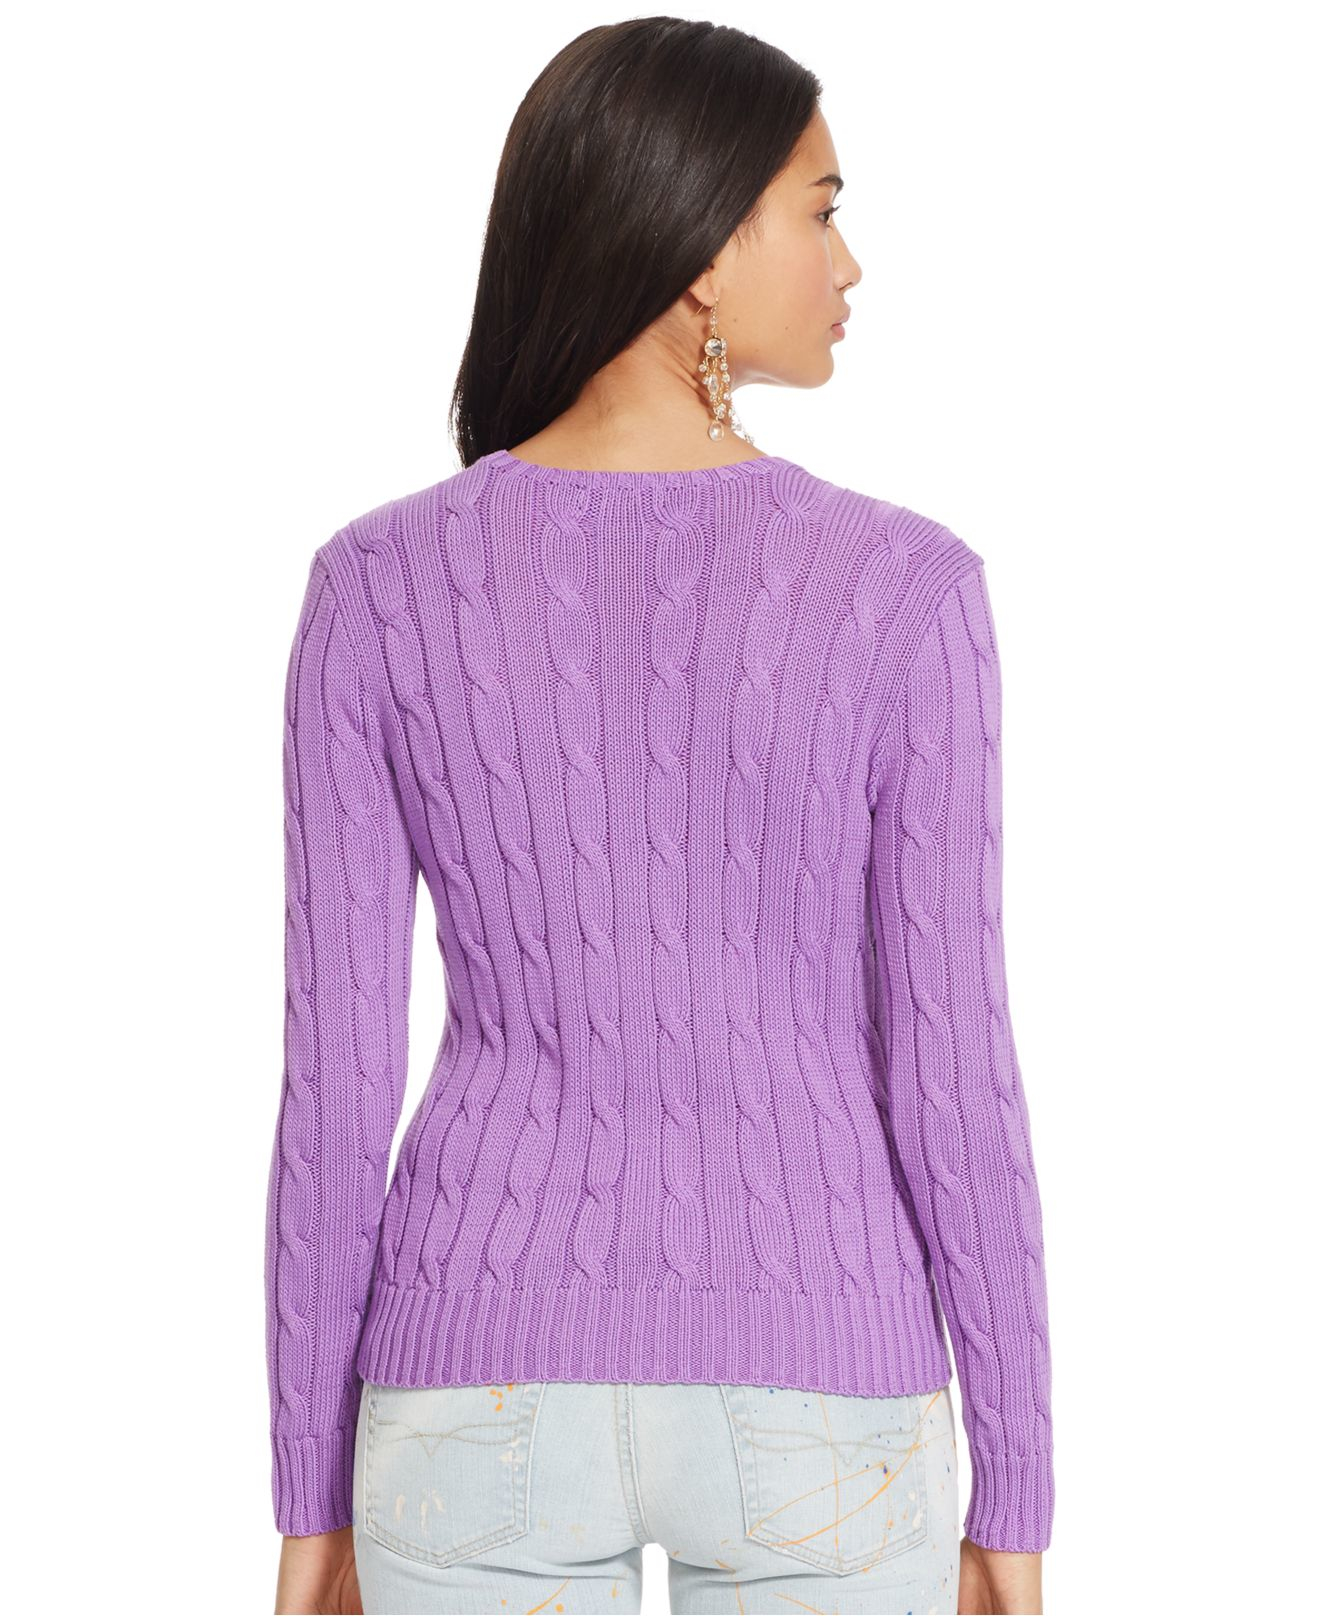 Polo ralph lauren Cable-knit Crewneck Sweater in Purple | Lyst